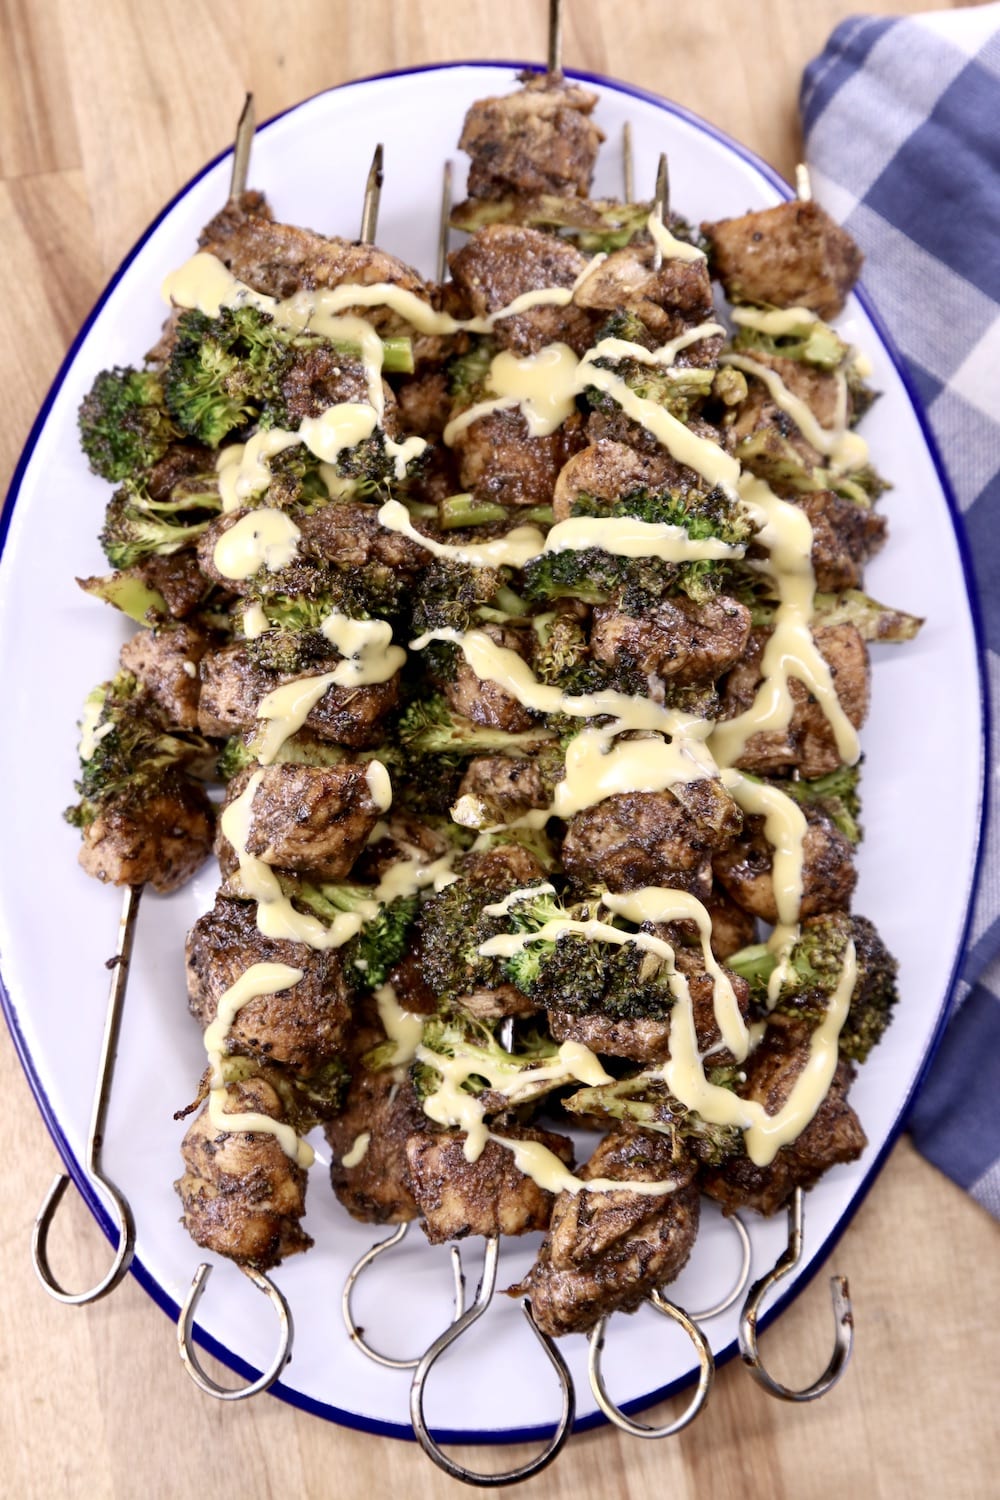 Platter of chicken kabobs with broccoli and cheese